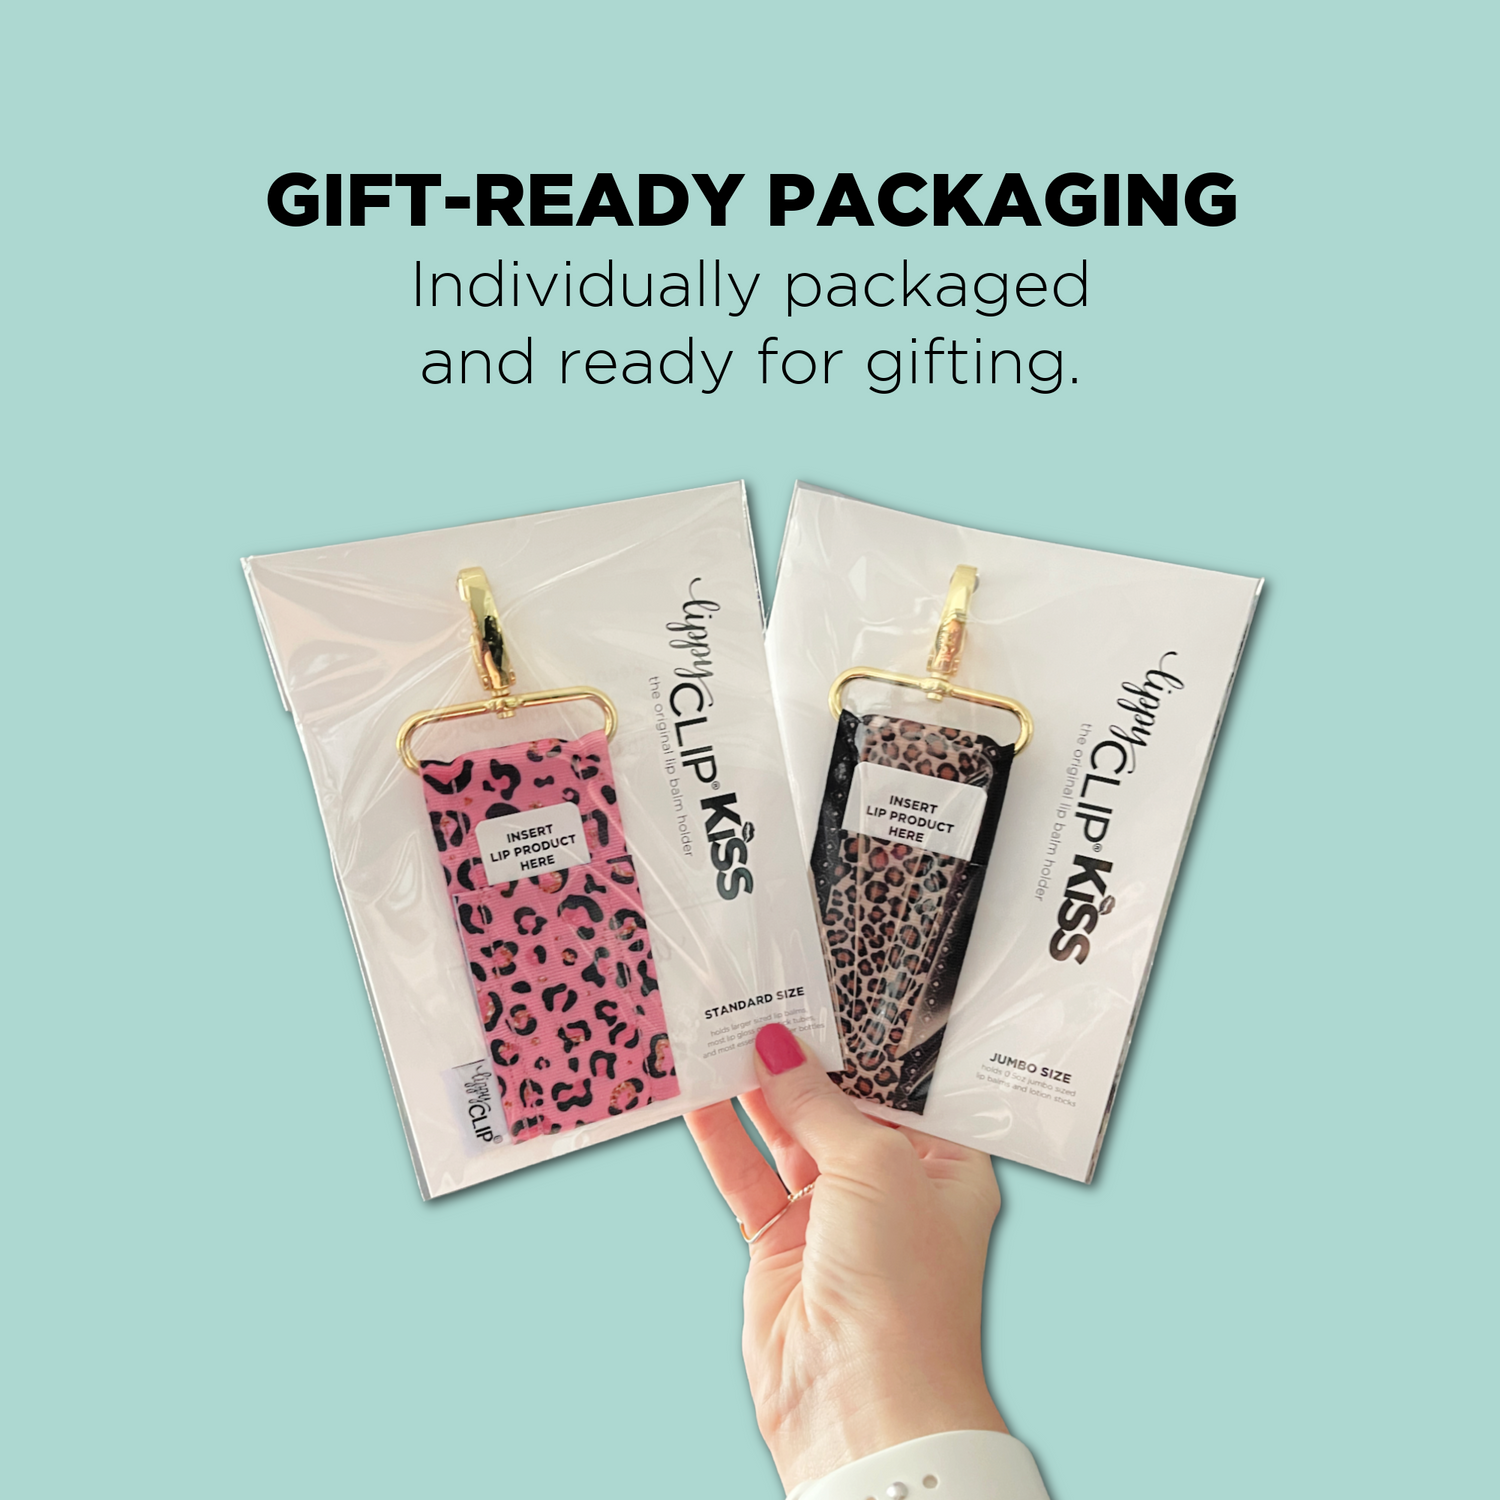 Leopard LippyClipKISS for larger lip balms, essential oil rollers, and more